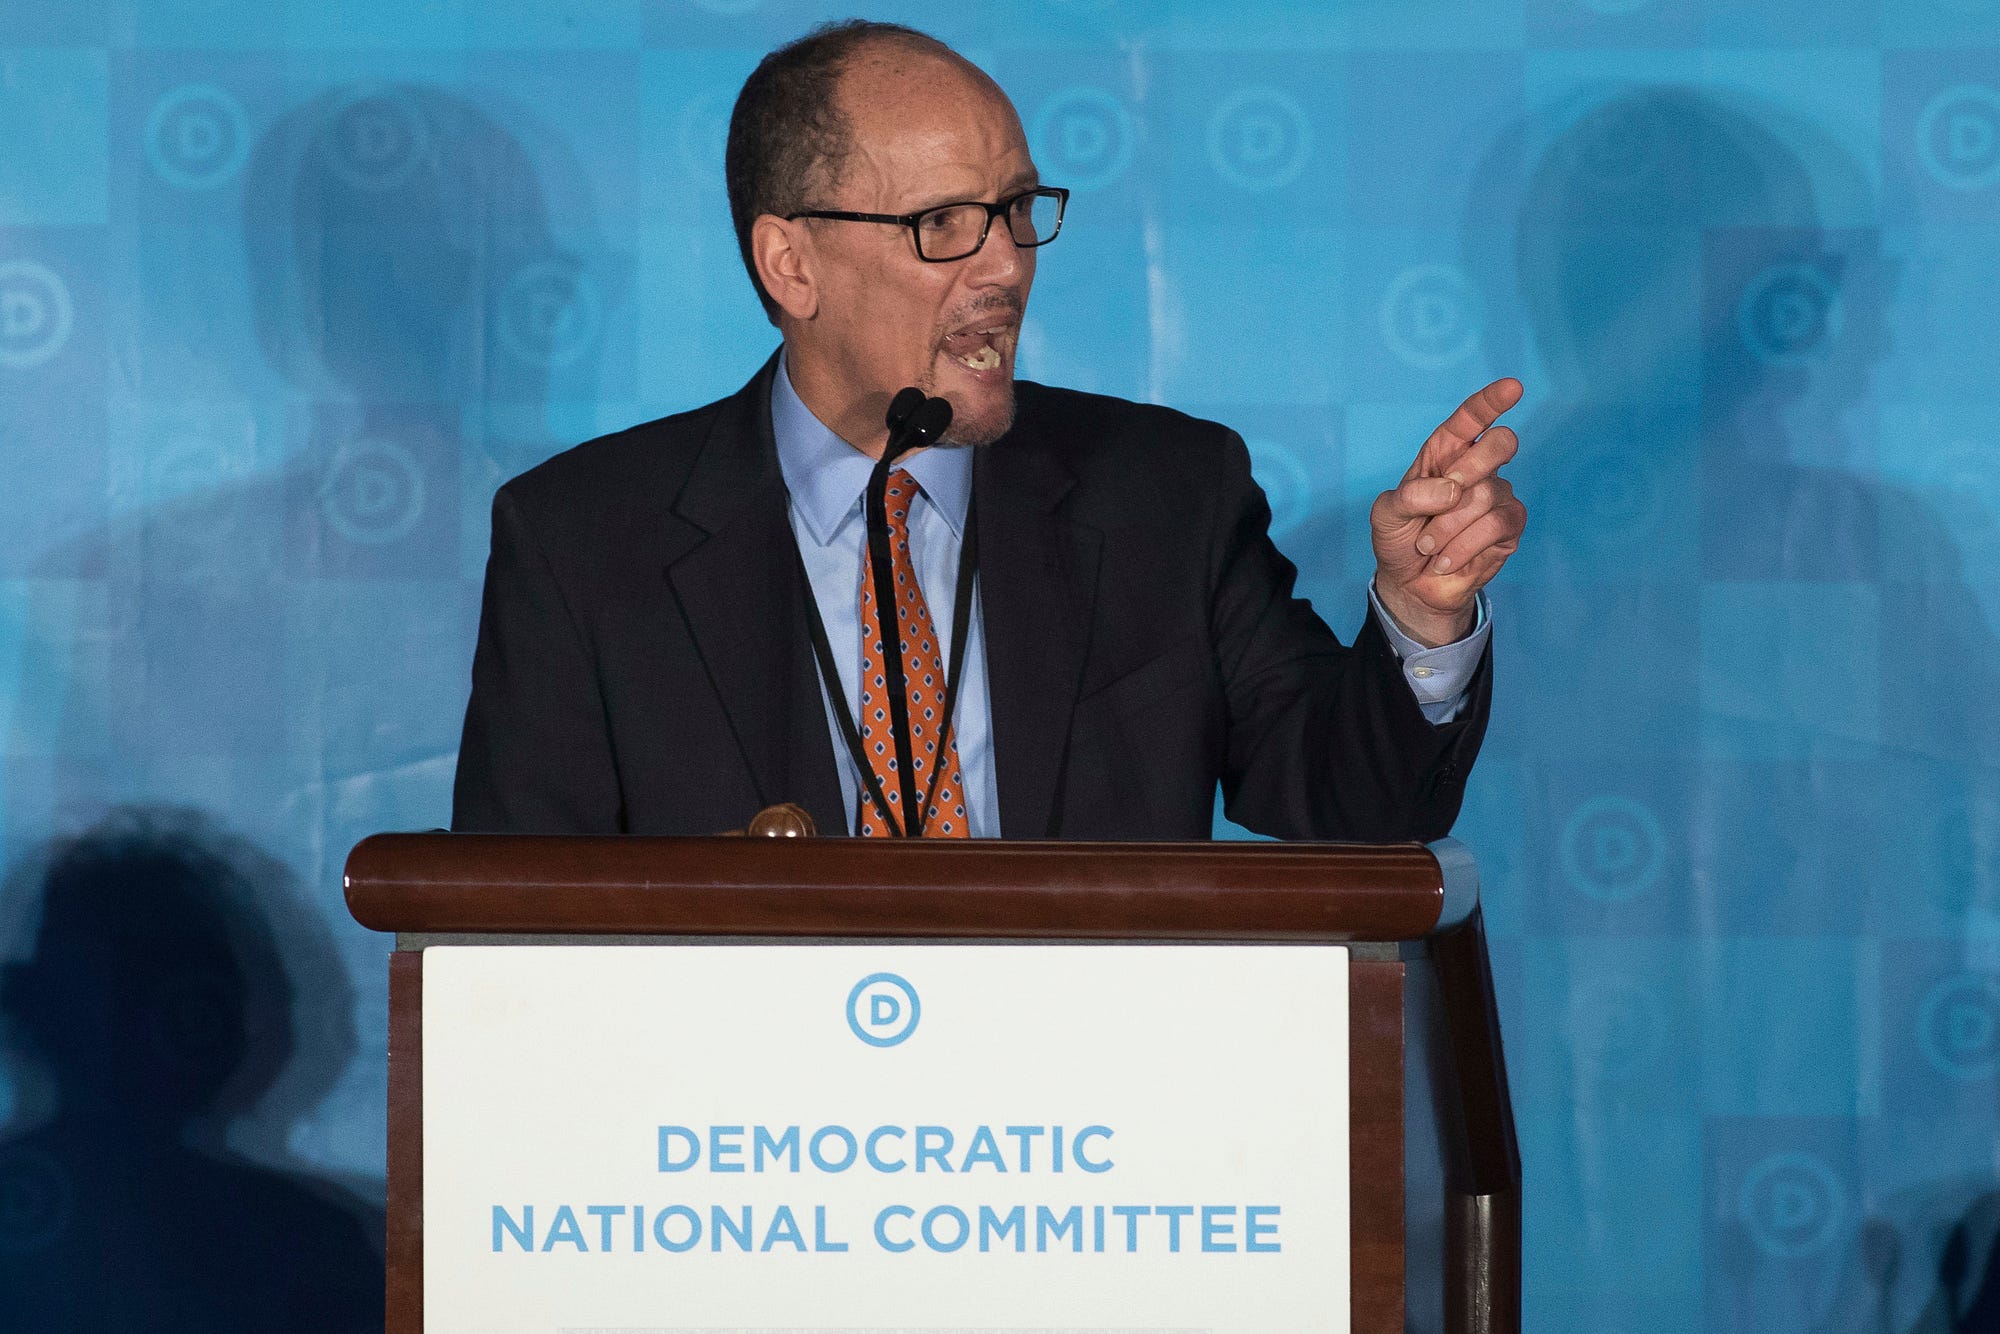 The Member Of The Democratic National Committee